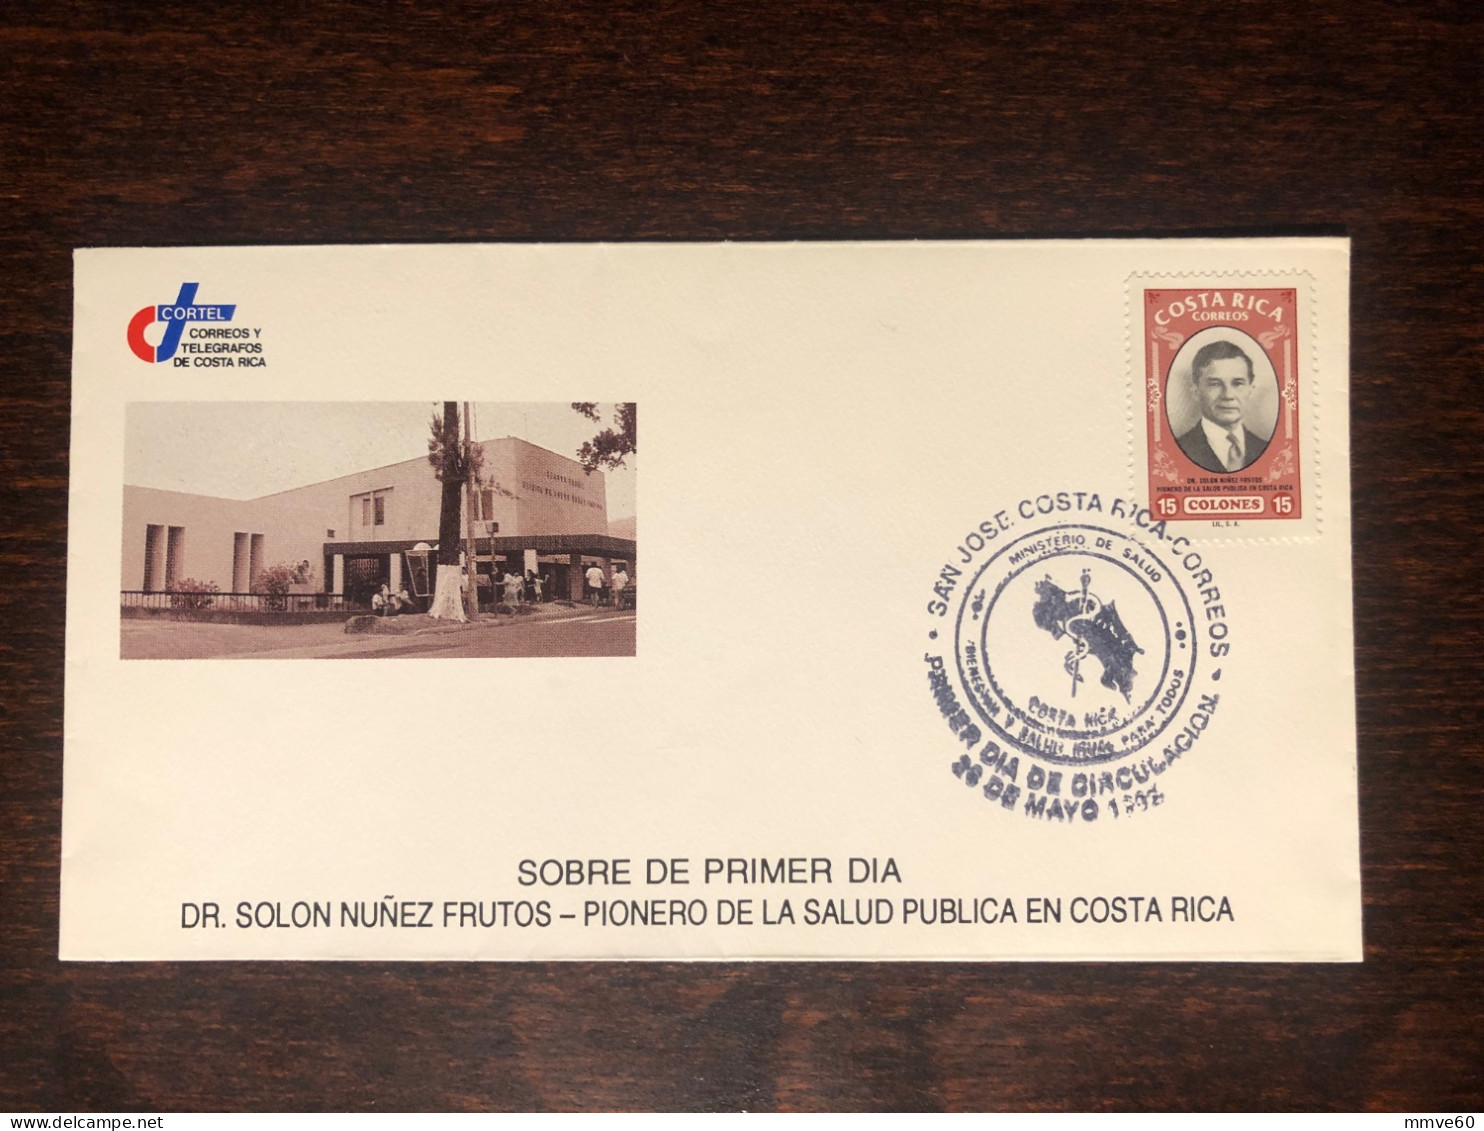 COSTA RICA  FDC COVER 1992 YEAR HOSPITAL DOCTOR FRUTOS  HEALTH MEDICINE STAMPS - Costa Rica